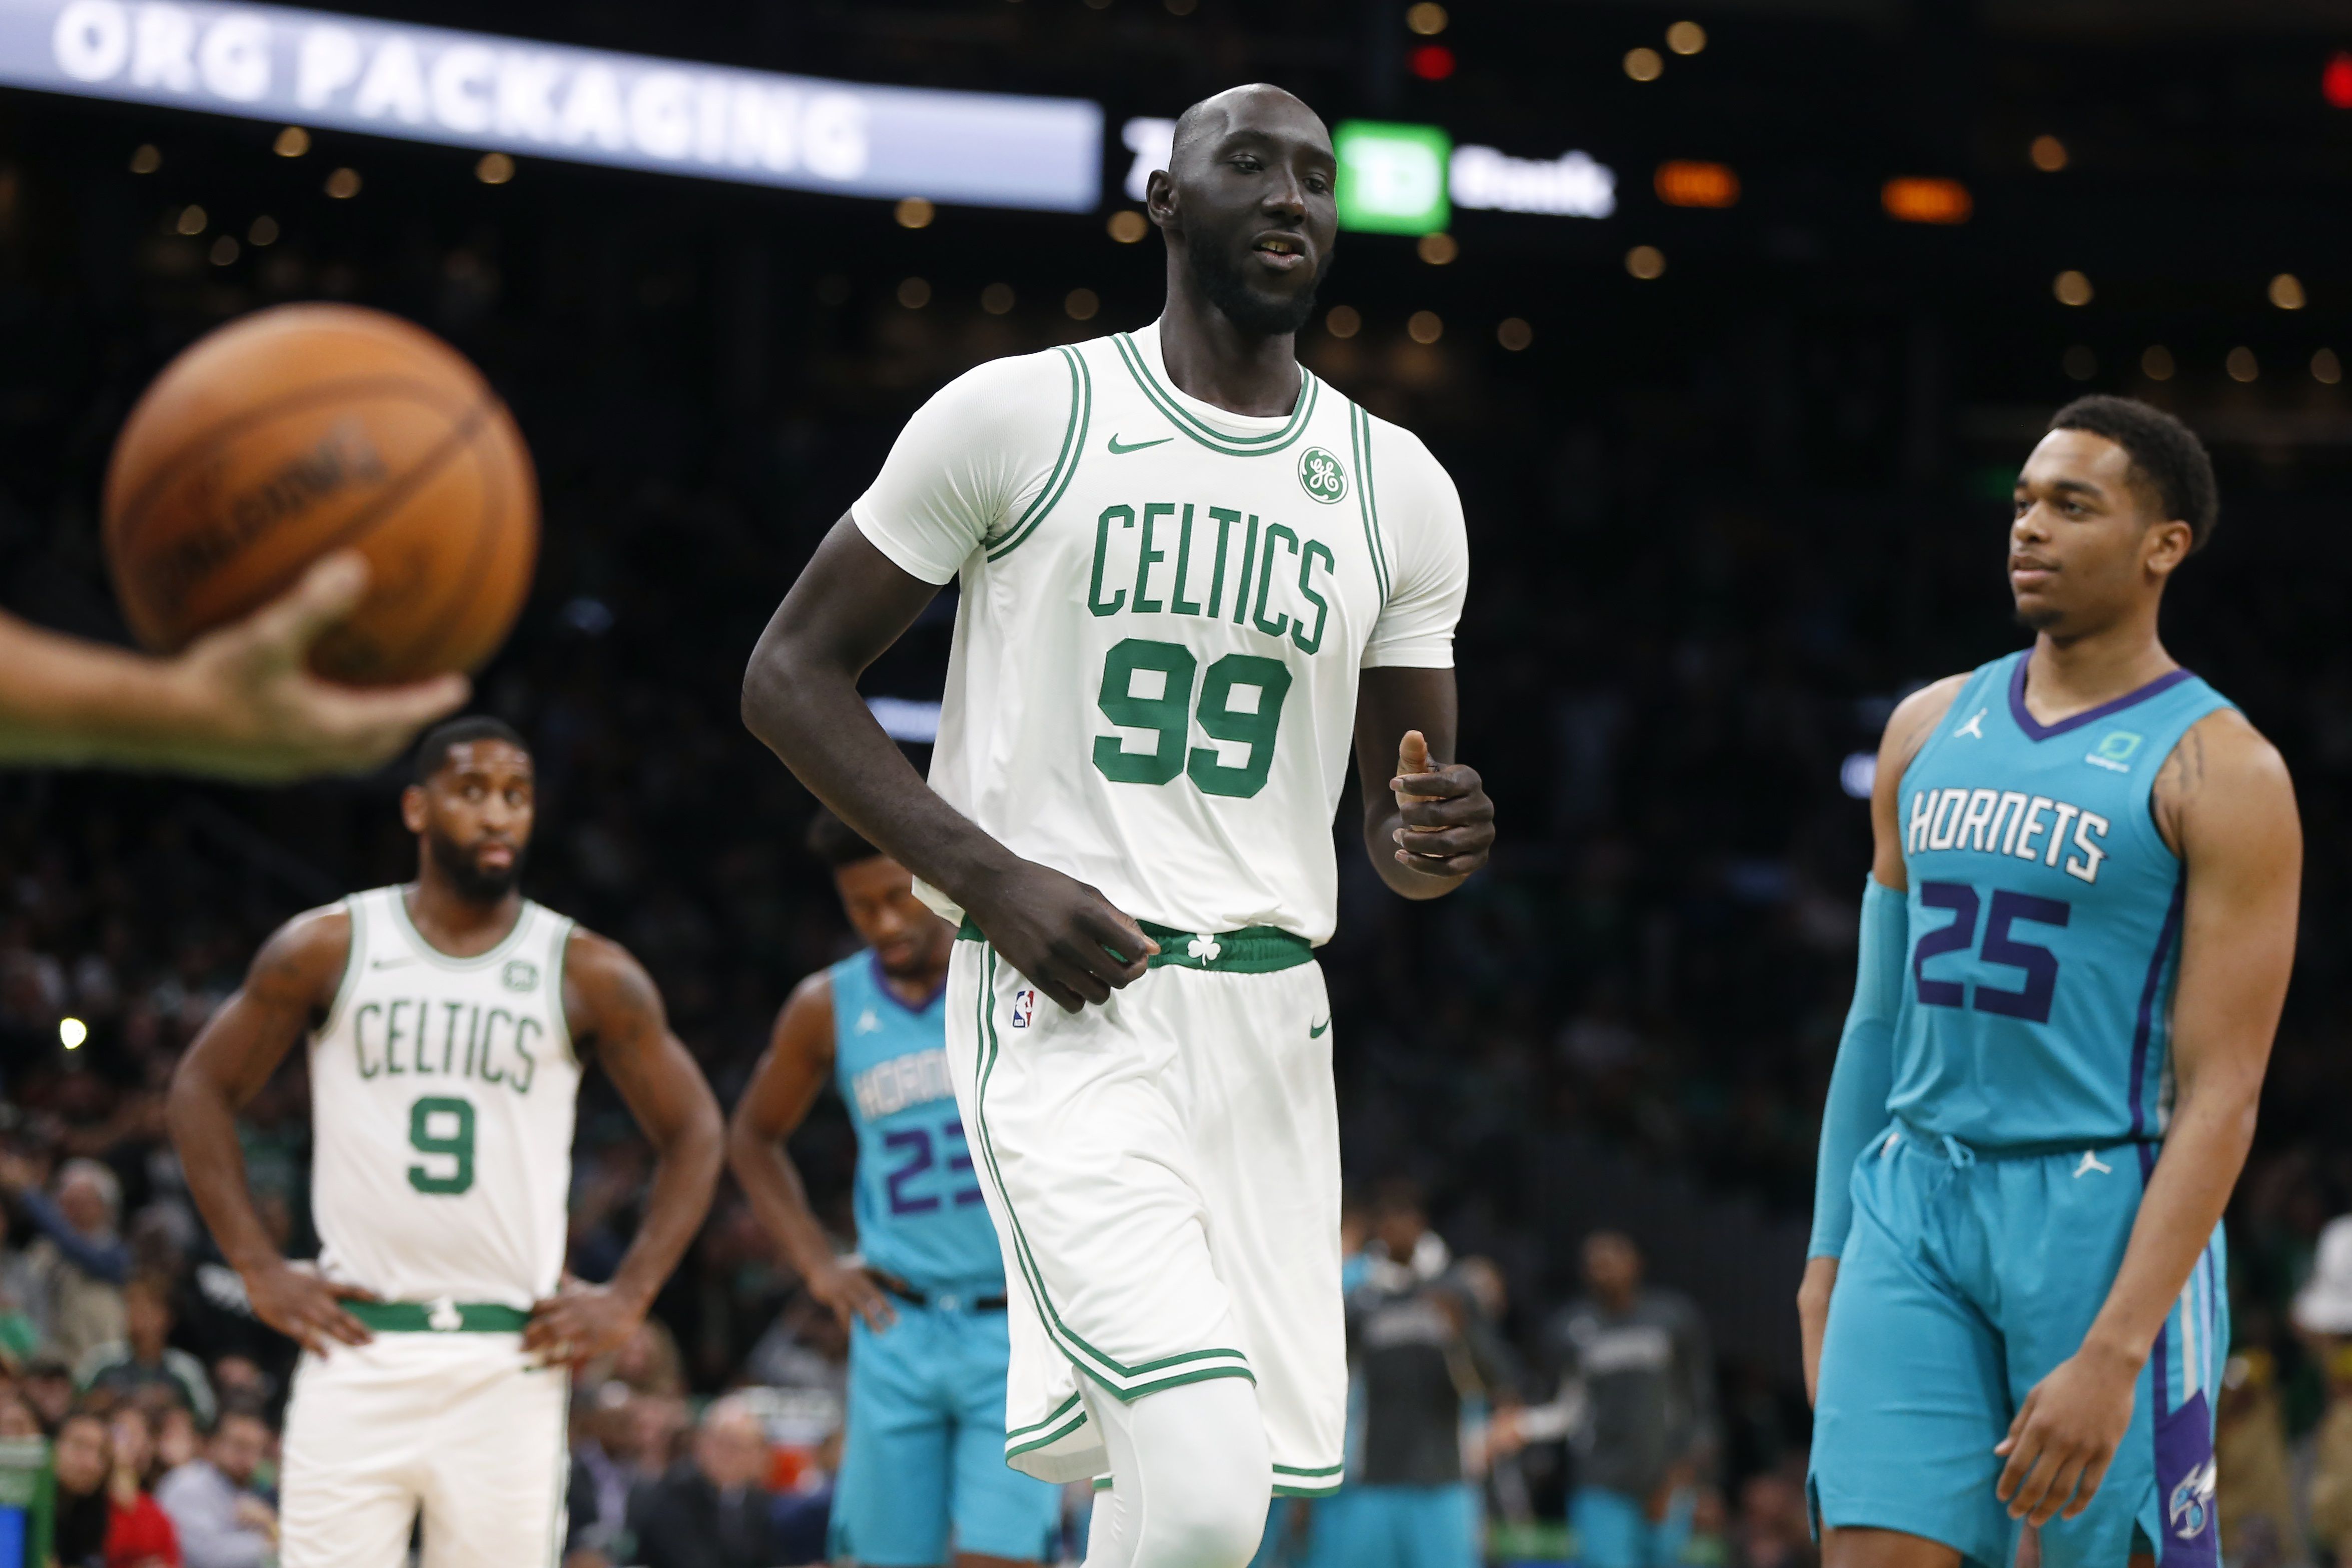 Learning To Swim With 7-Foot-5 Celtic Tacko Fall